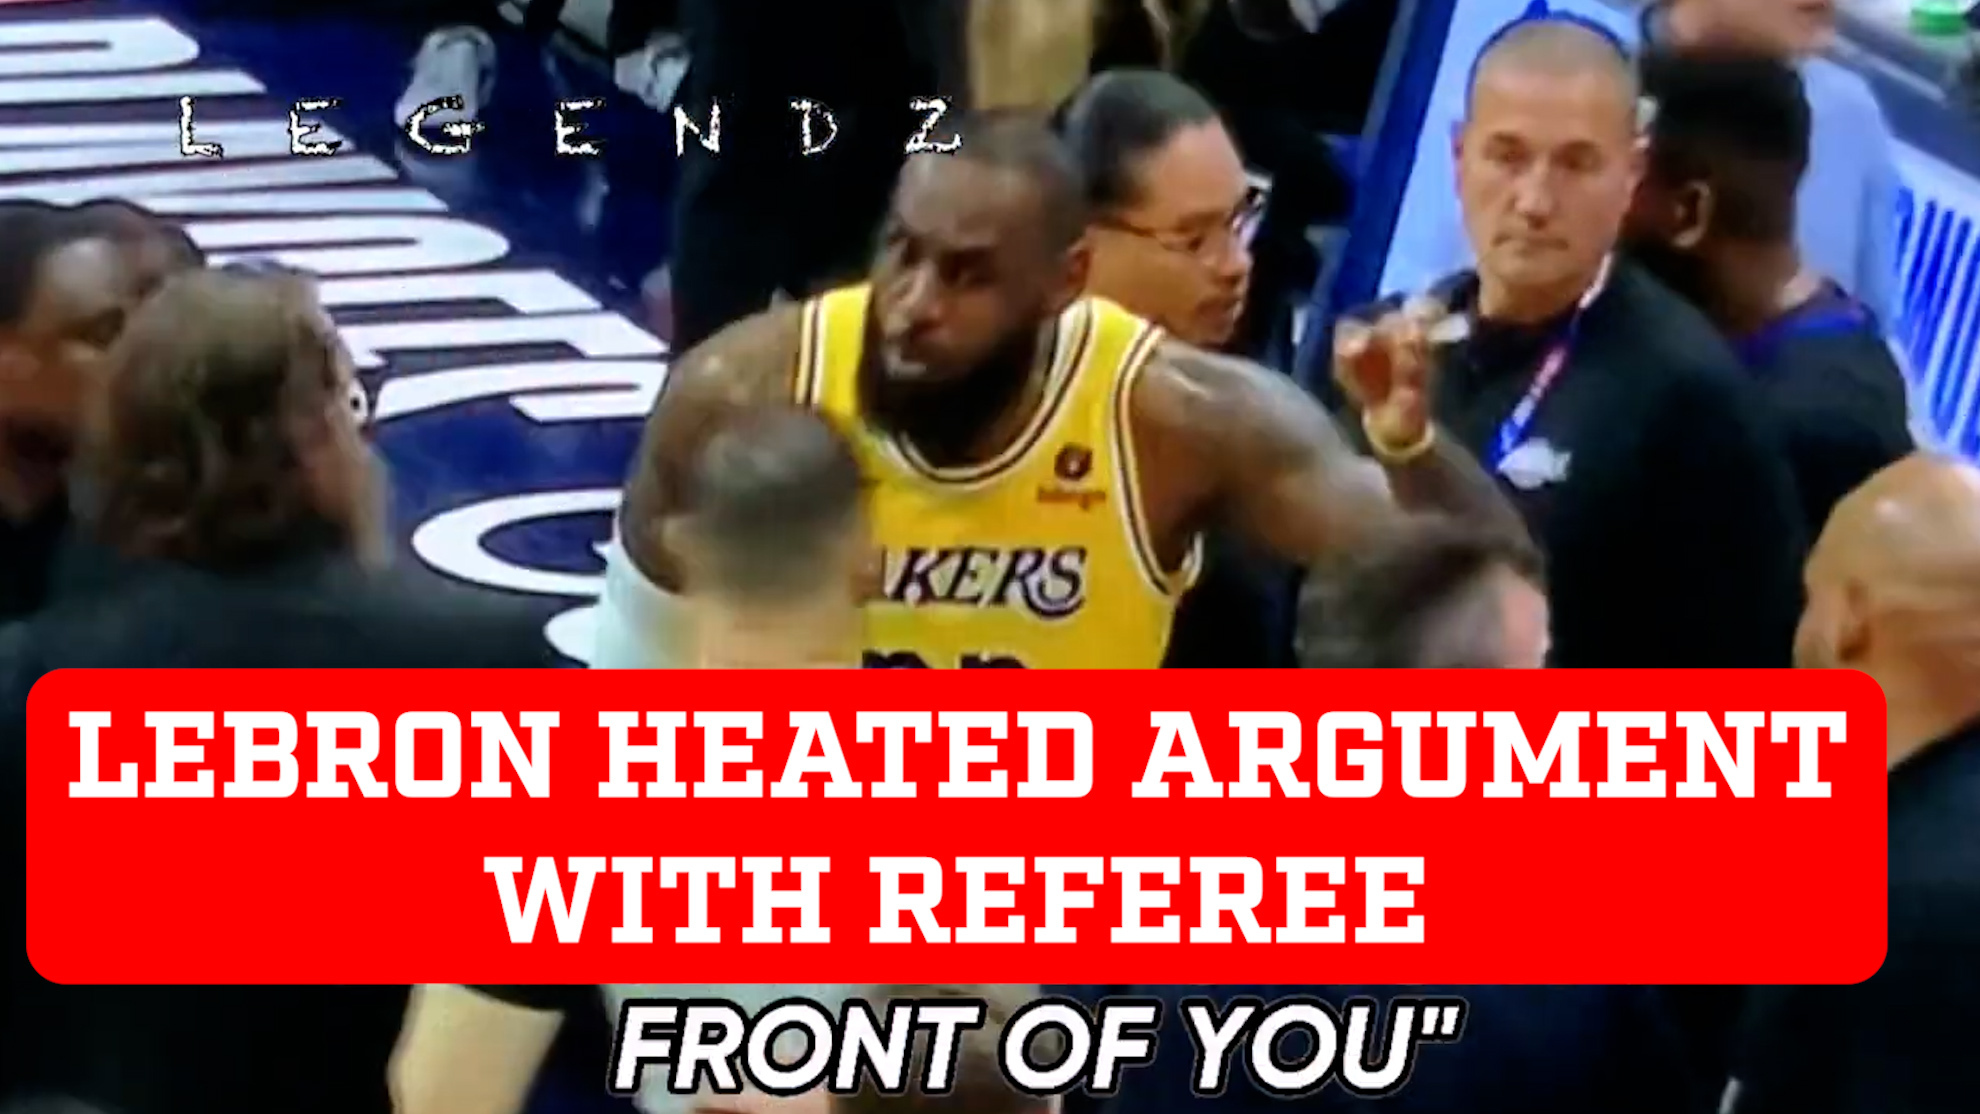 LeBron James heated argument with NBA referee leaked audio after Denver loss